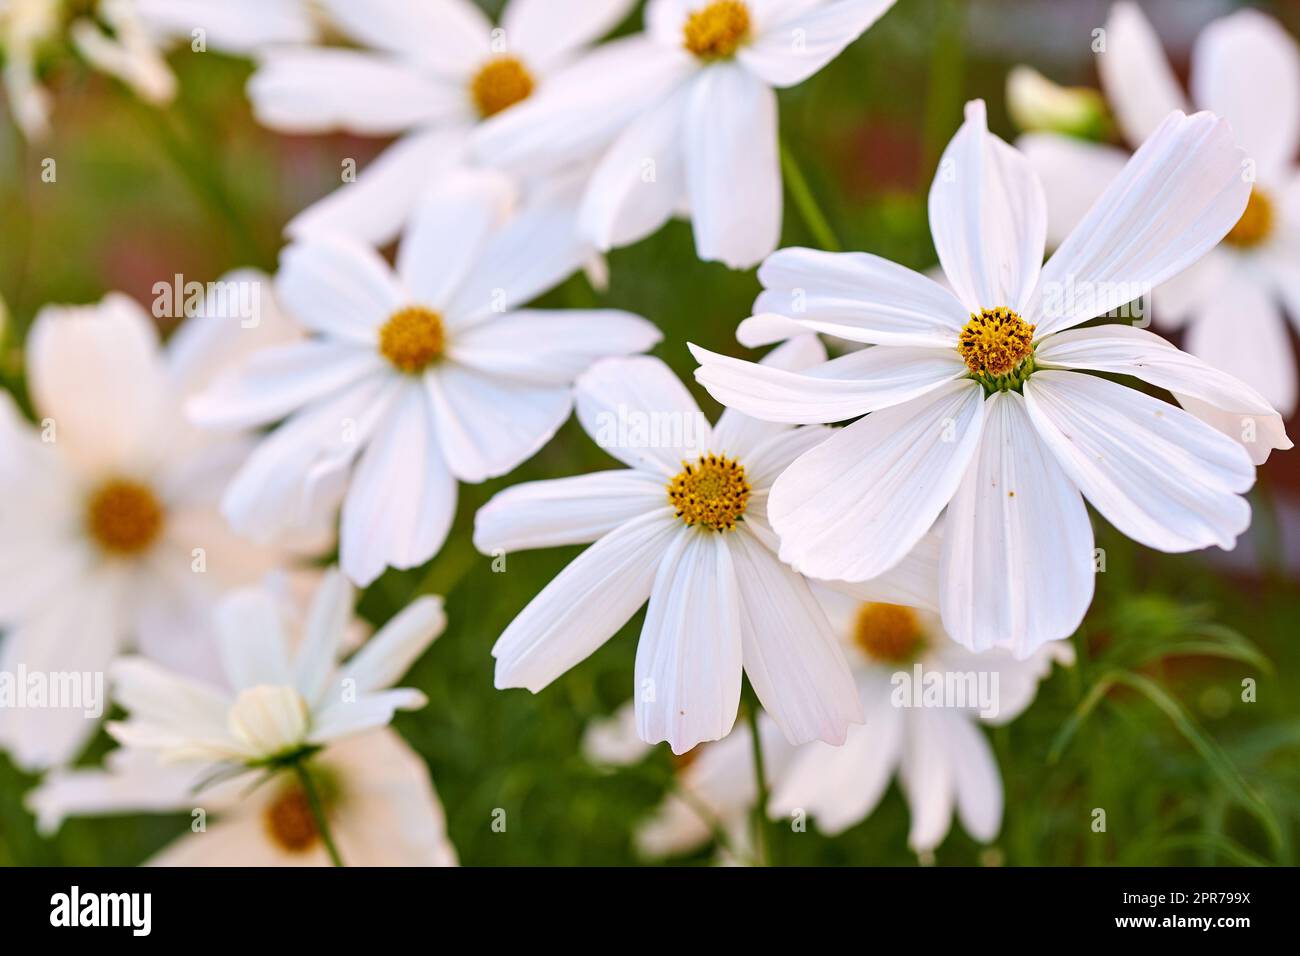 Closeup of white daisy Marguerite flowers growing in a garden. Beautiful nature scenery of bright flower petals outdoors. Gardening perennial plants for backyard decoration or park landscaping Stock Photo